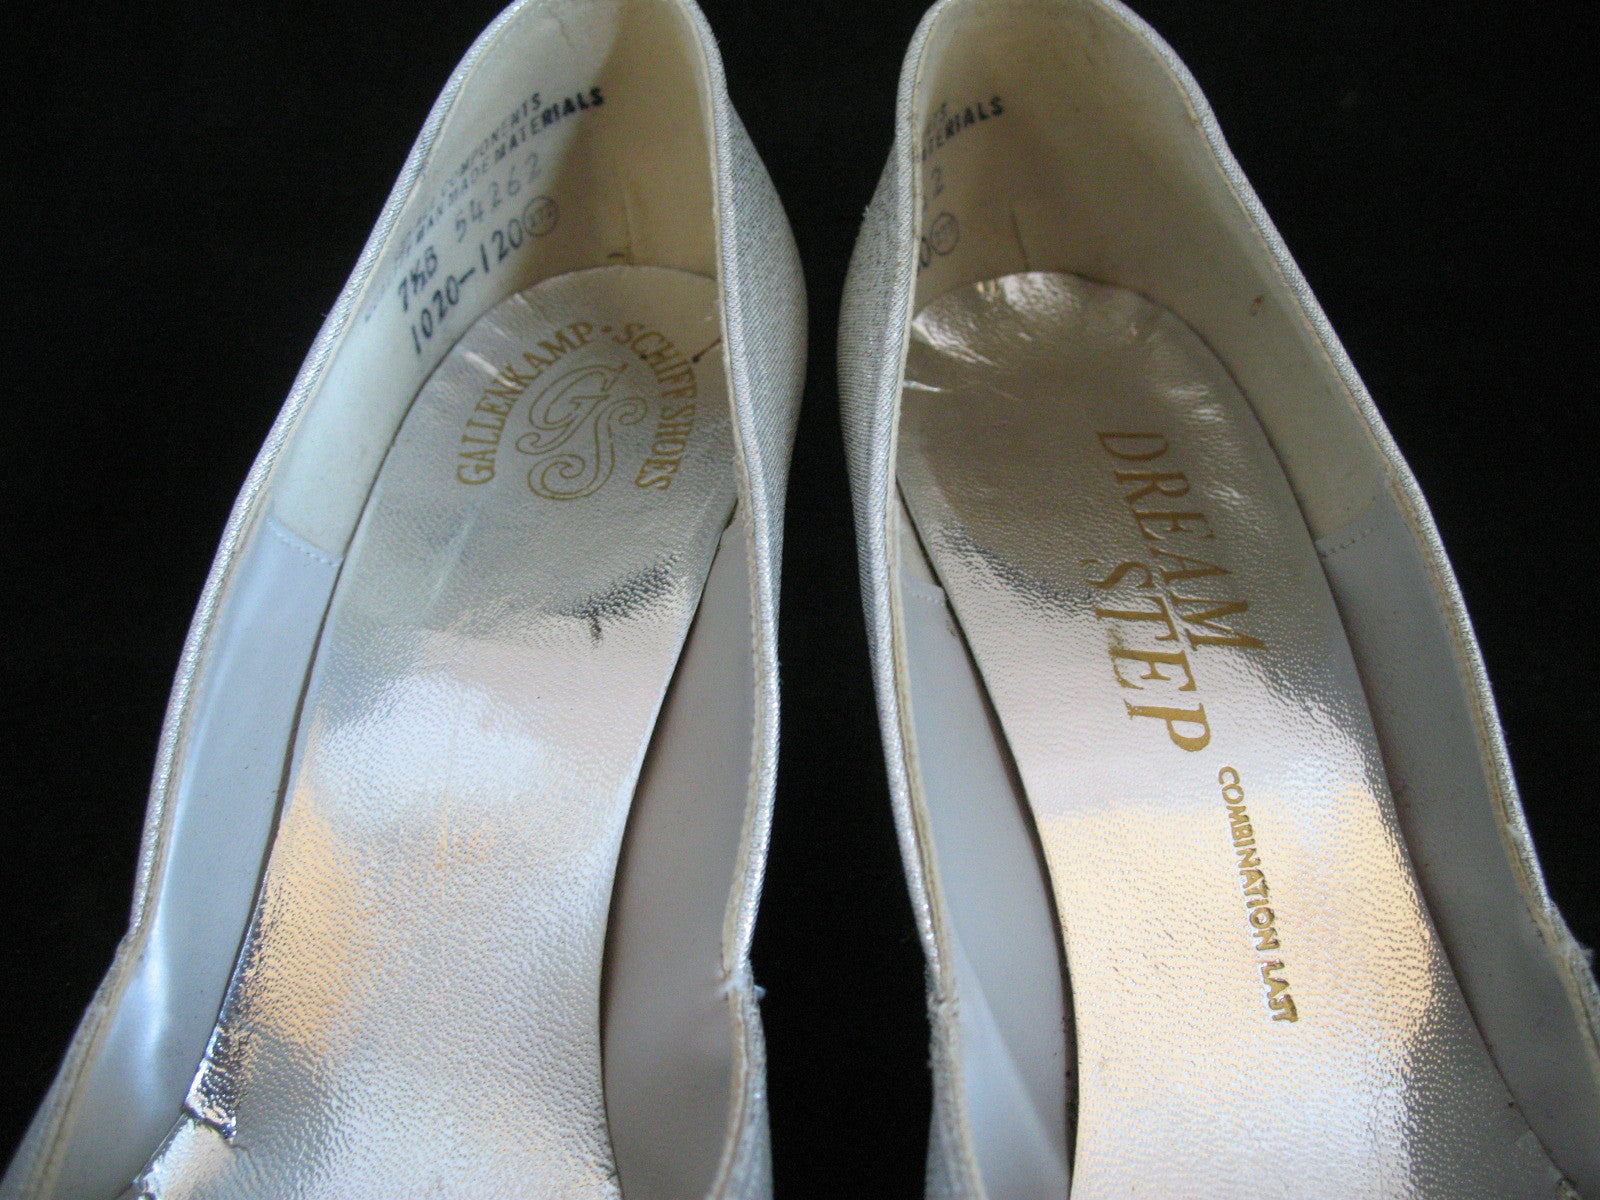 womens silver shoes size 7